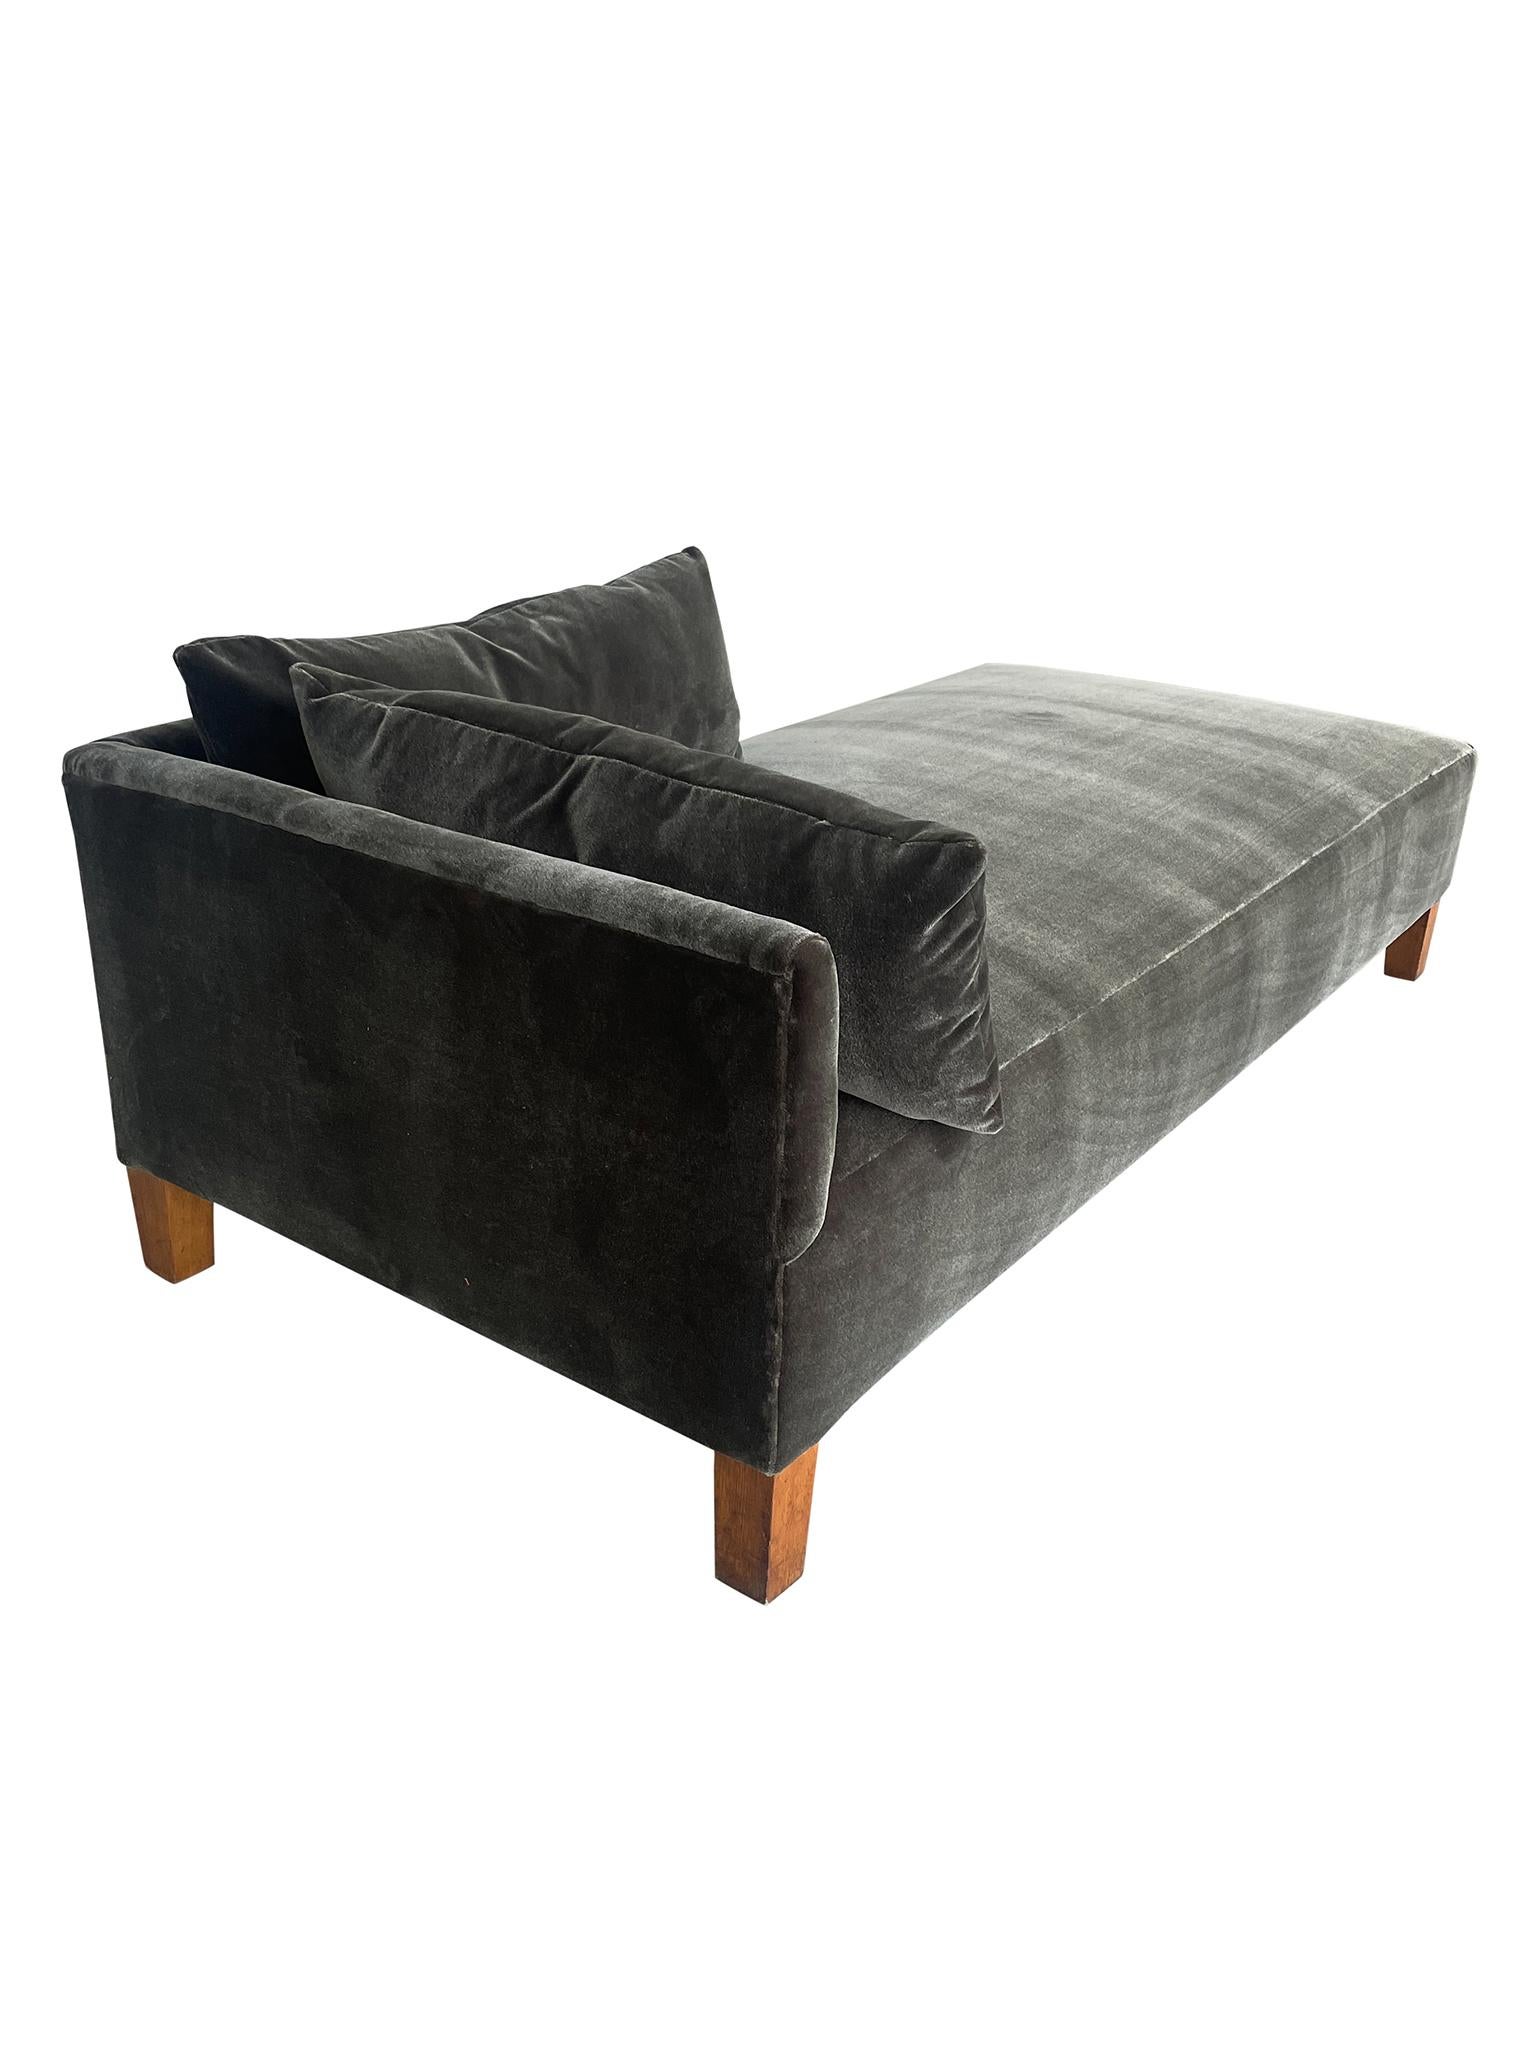 Lovely c. 1930s Scandinavian Modern Daybed. Designed with modern solid oak tapered legs, this sleek daybed features a low two sided head rest and a comfortable seat cushion. With new reupholstery and two custom cushions in a luxurious pewter green